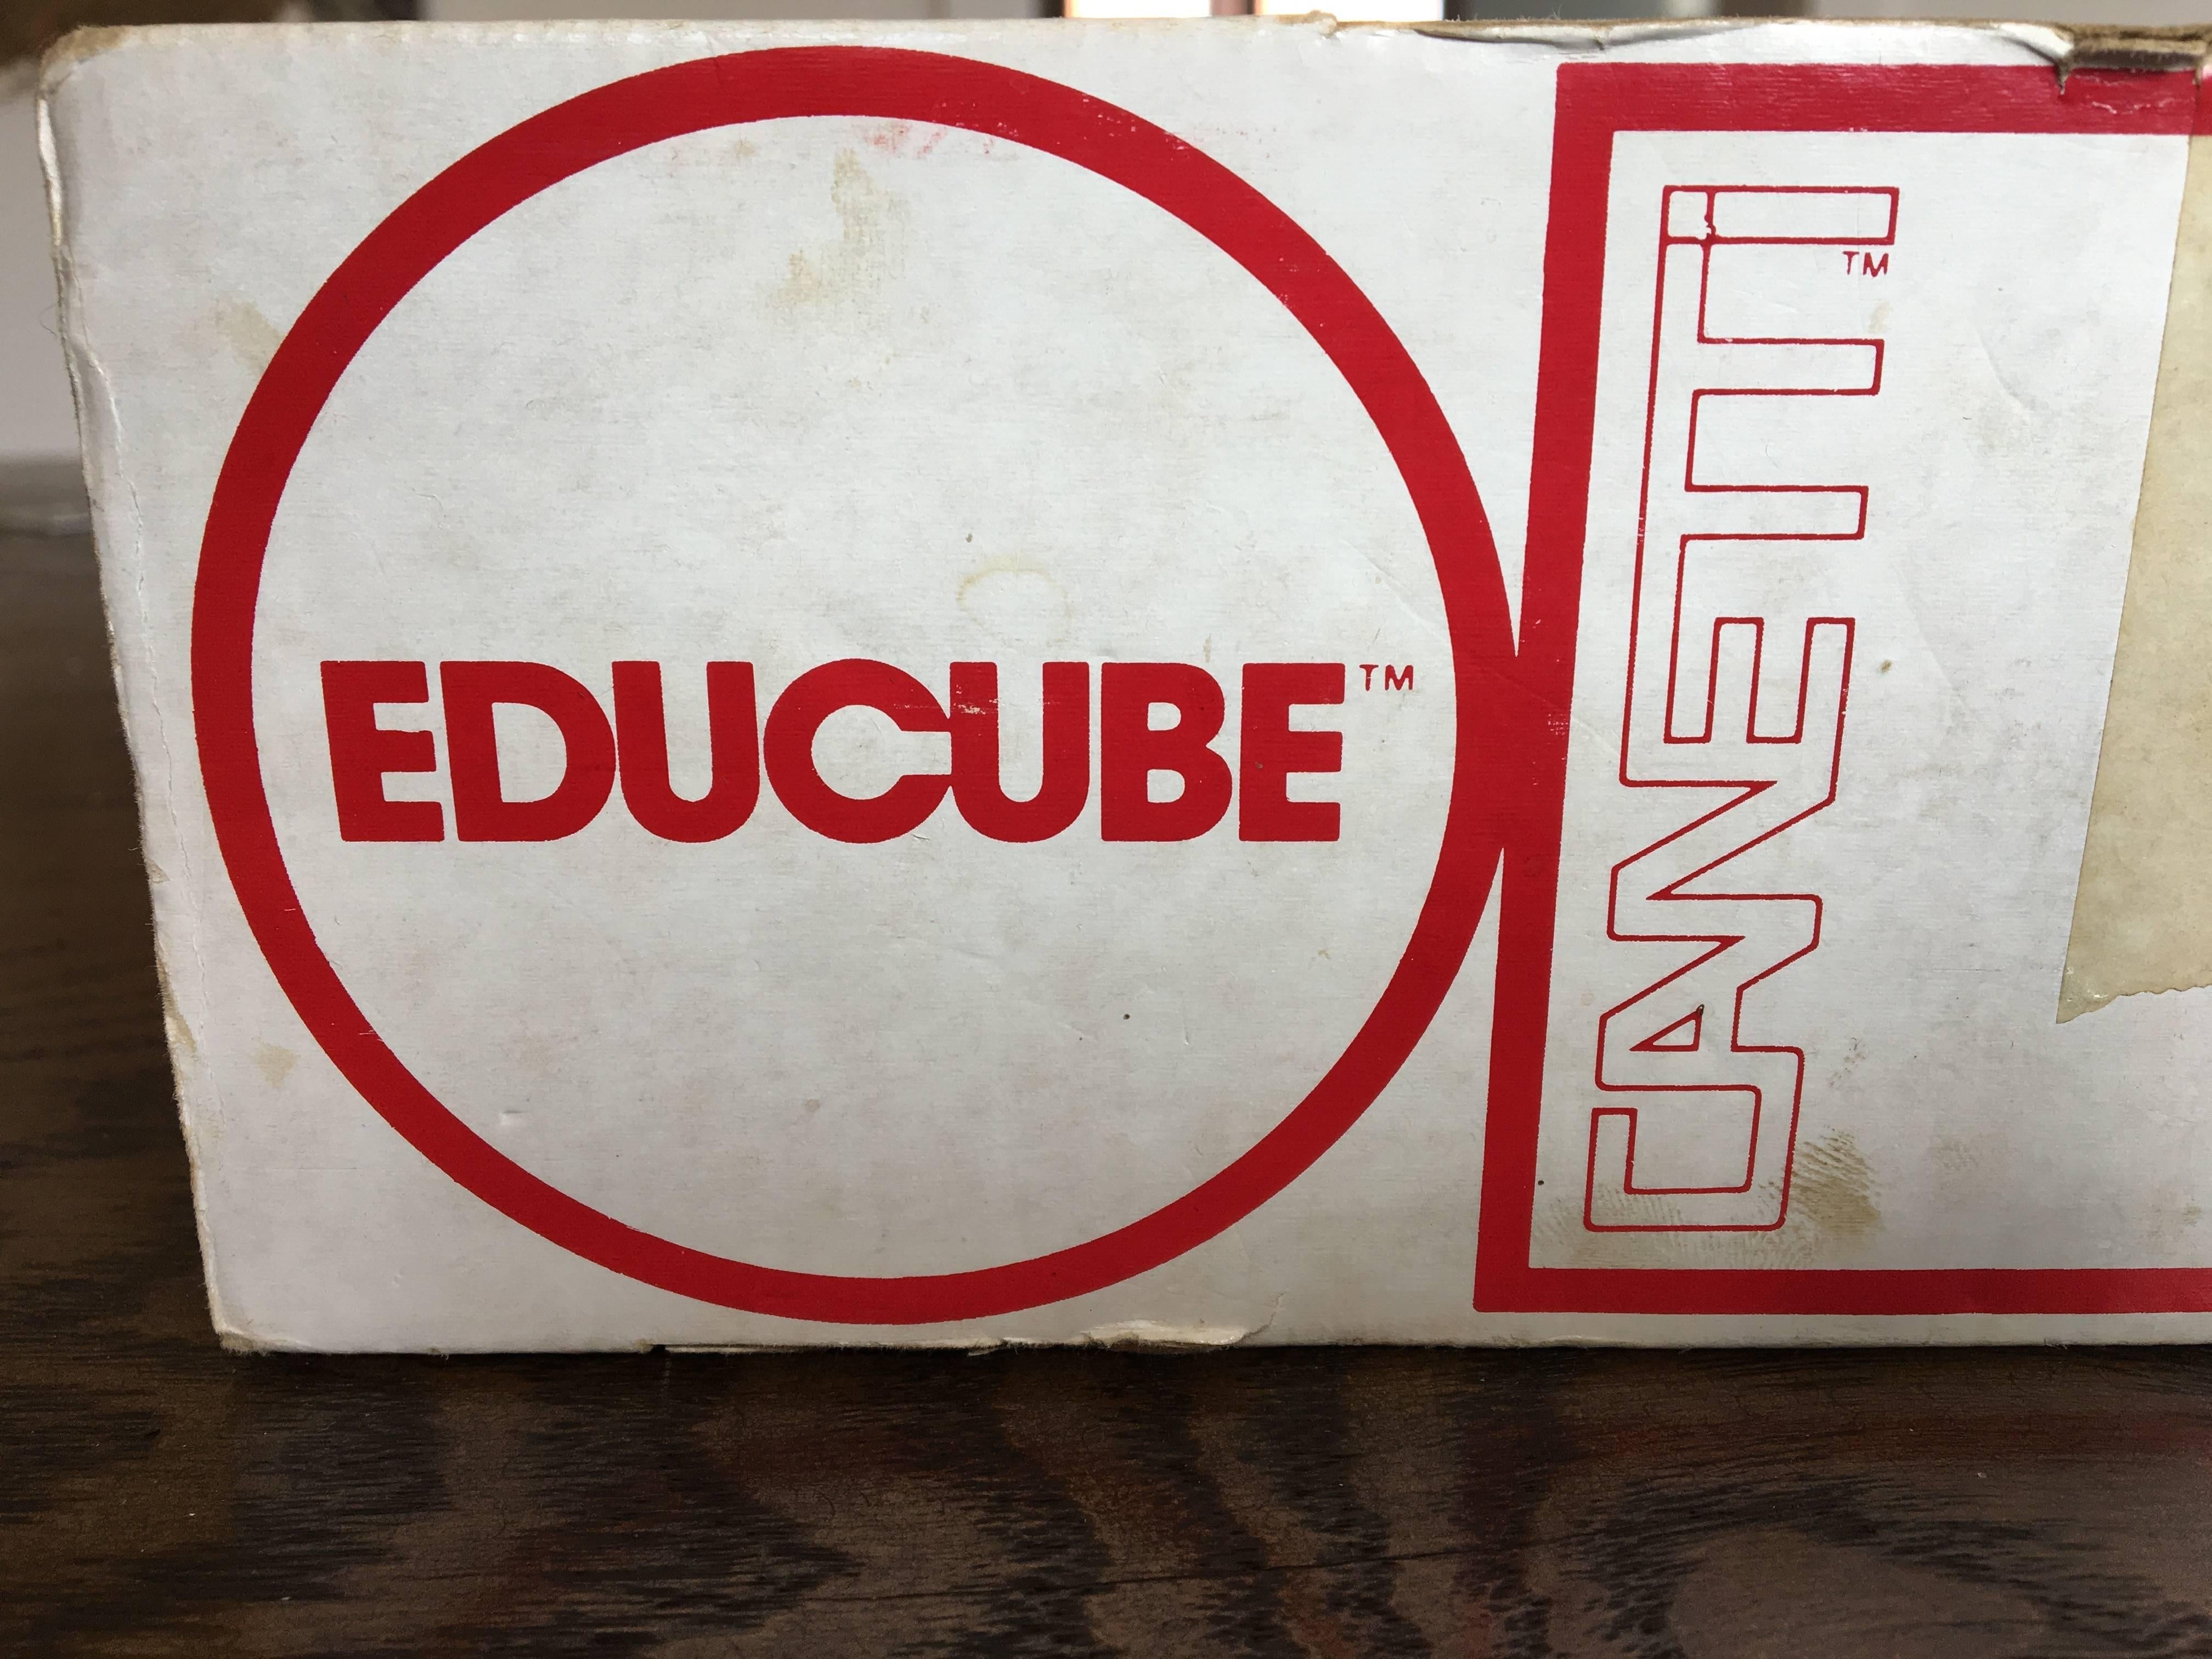 Very rare educational toy designed by French Industrial designer Jean-Pierre Moussaud and distributed by Canetti, Inc. 1984.

Original box and paperwork included.